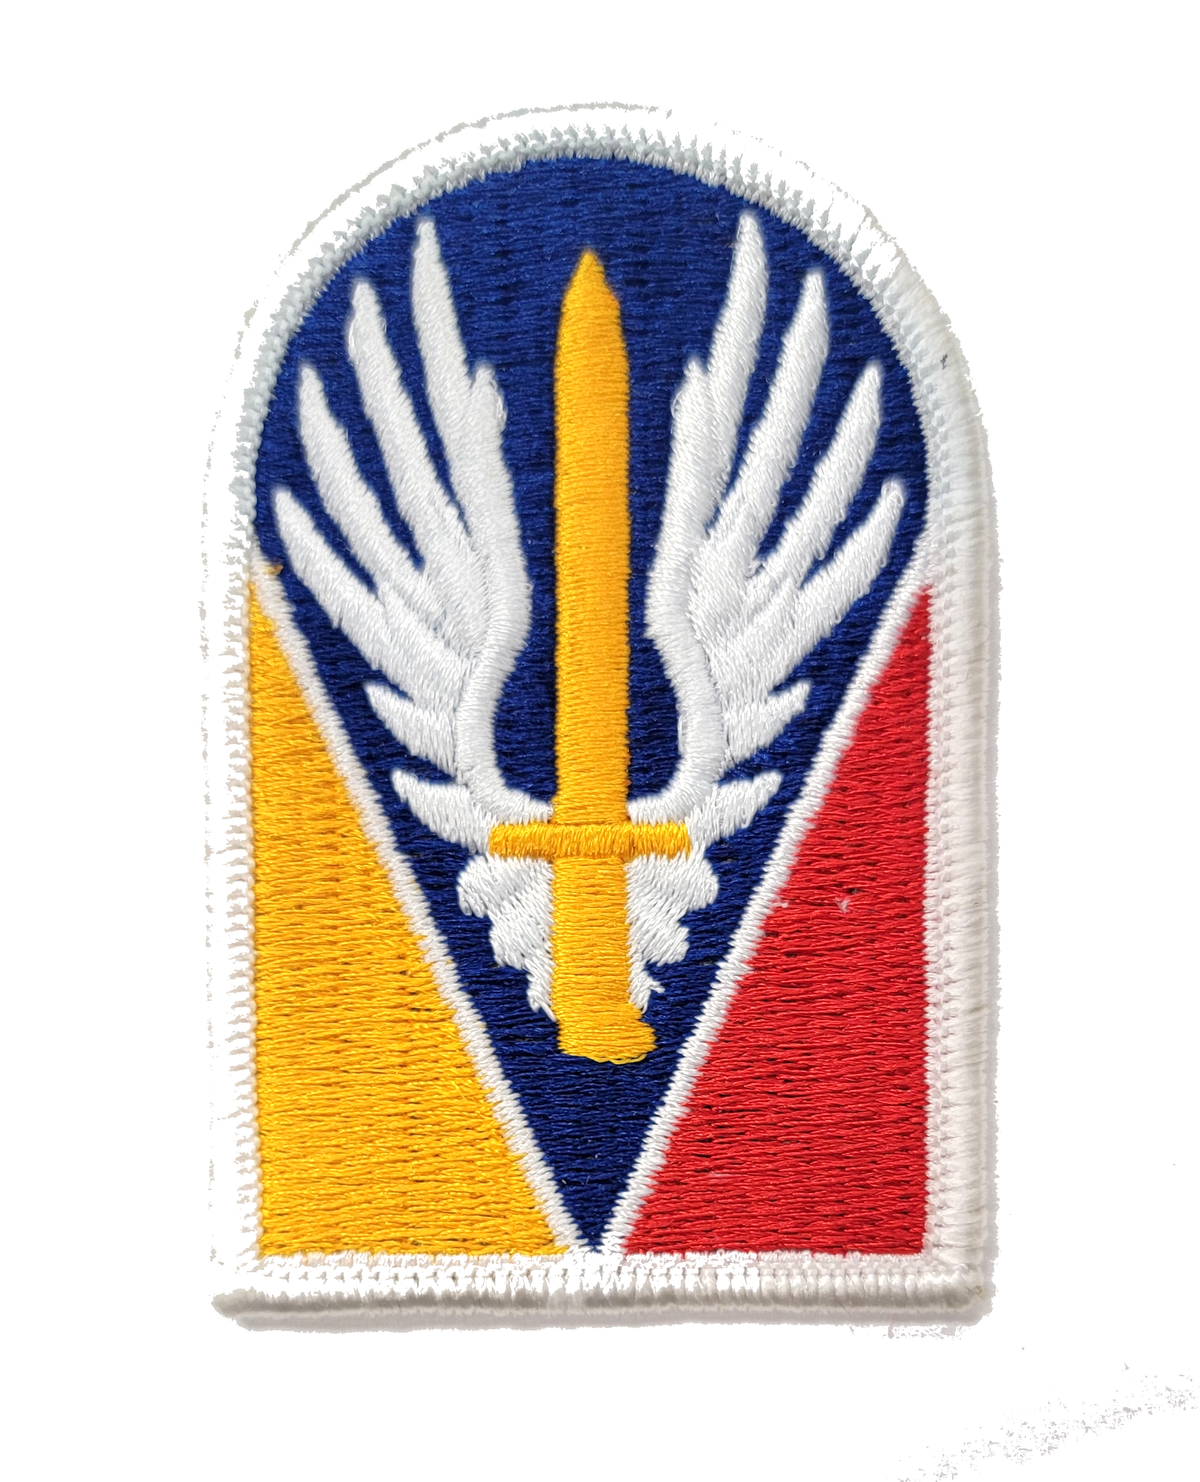 Joint Readiness Command Patch - Full Color